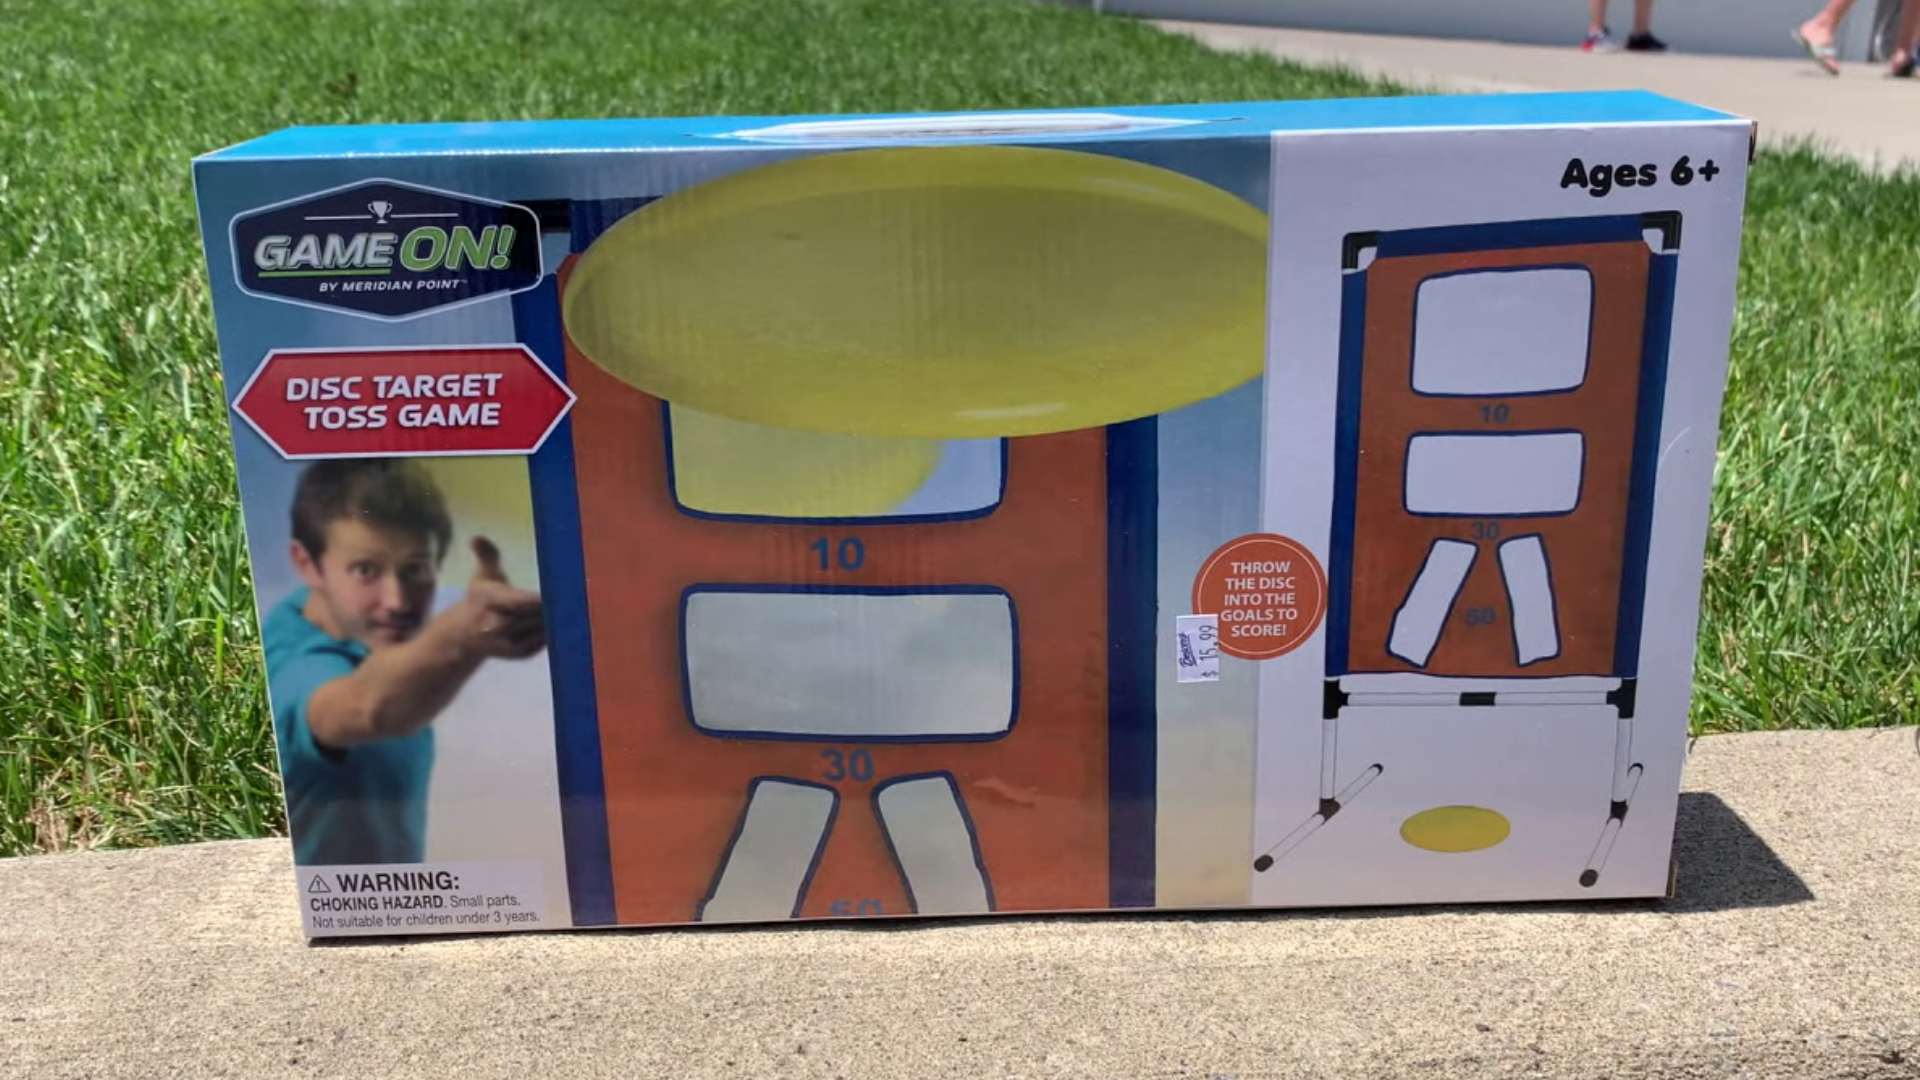 The maker claims this Disc Toss Game is fun for the whole family while teaching children about strategy, hand-eye coordination, and math.